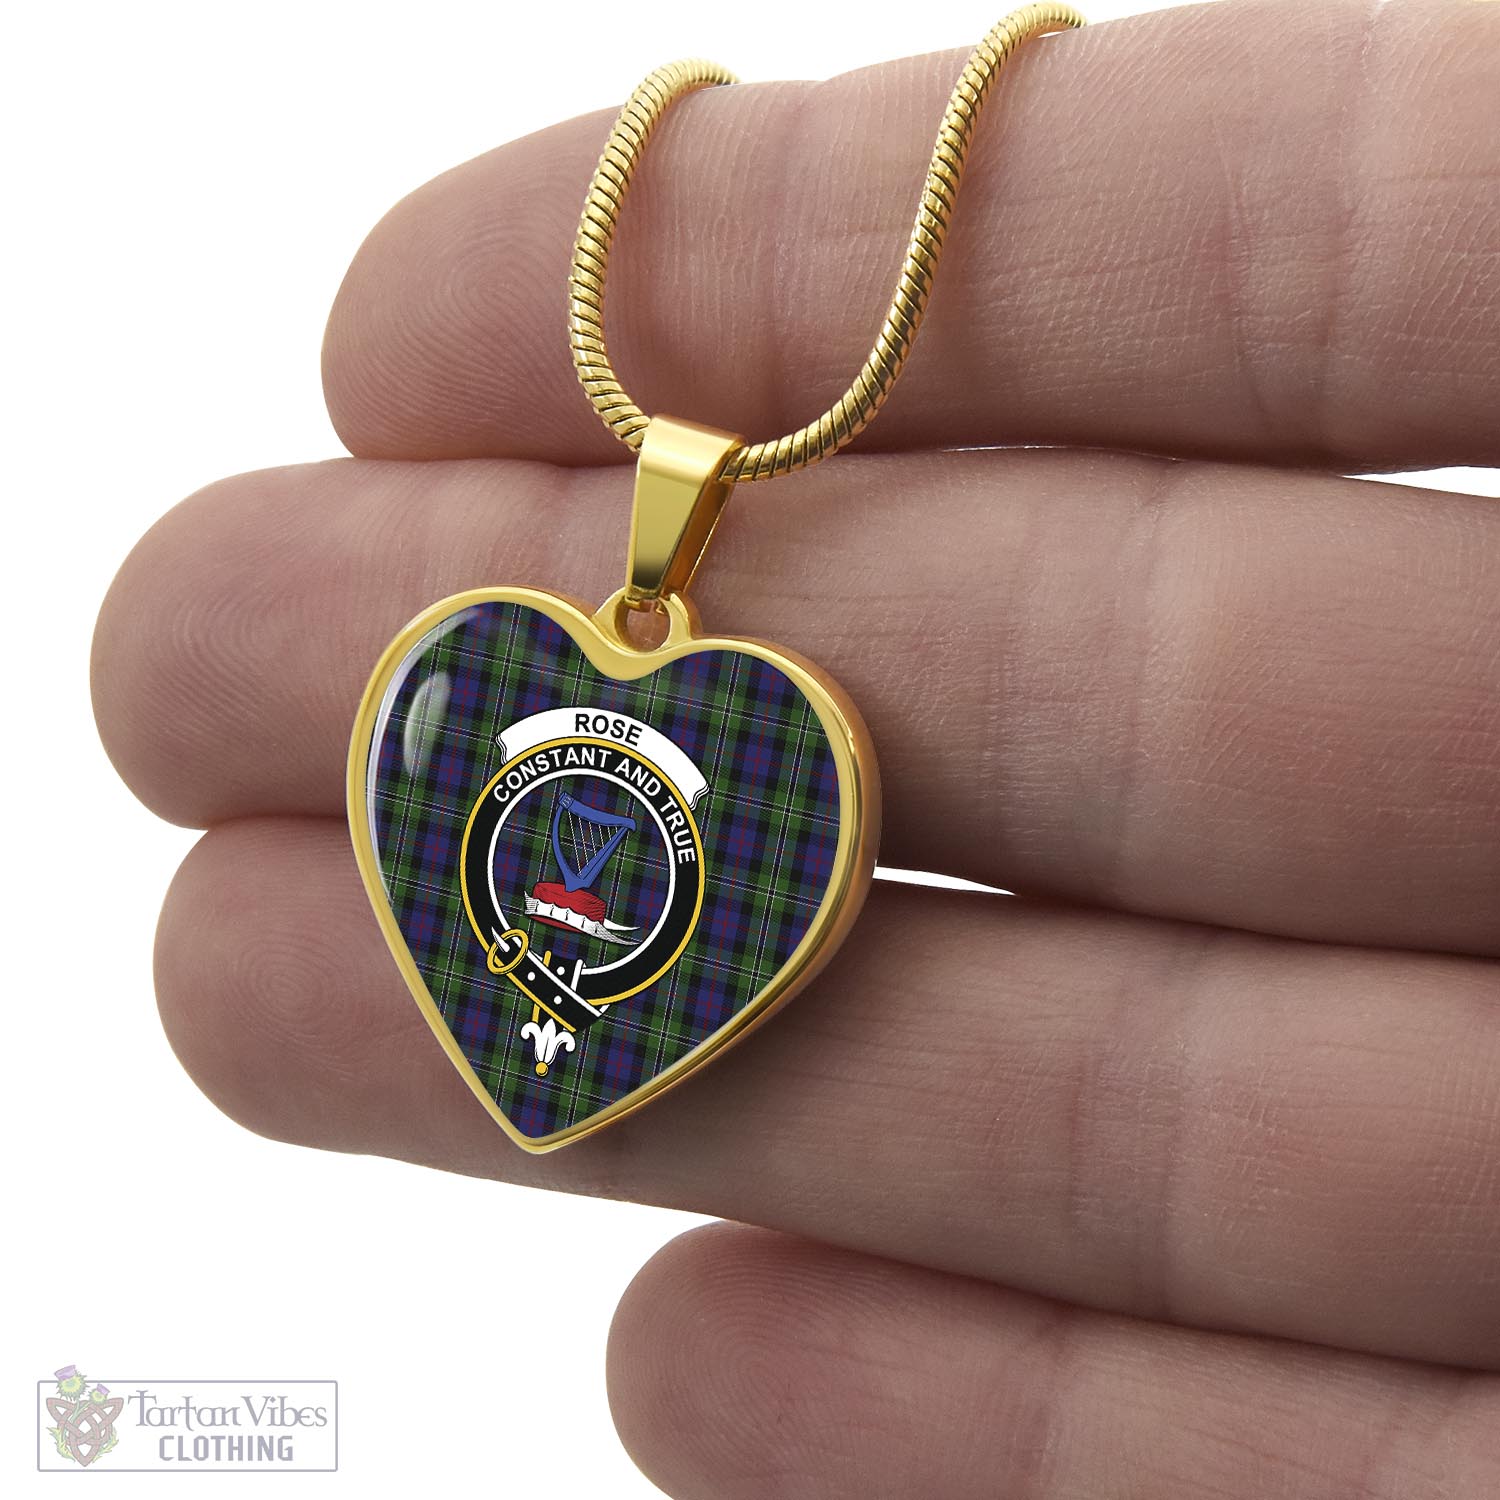 Tartan Vibes Clothing Rose Hunting Tartan Heart Necklace with Family Crest